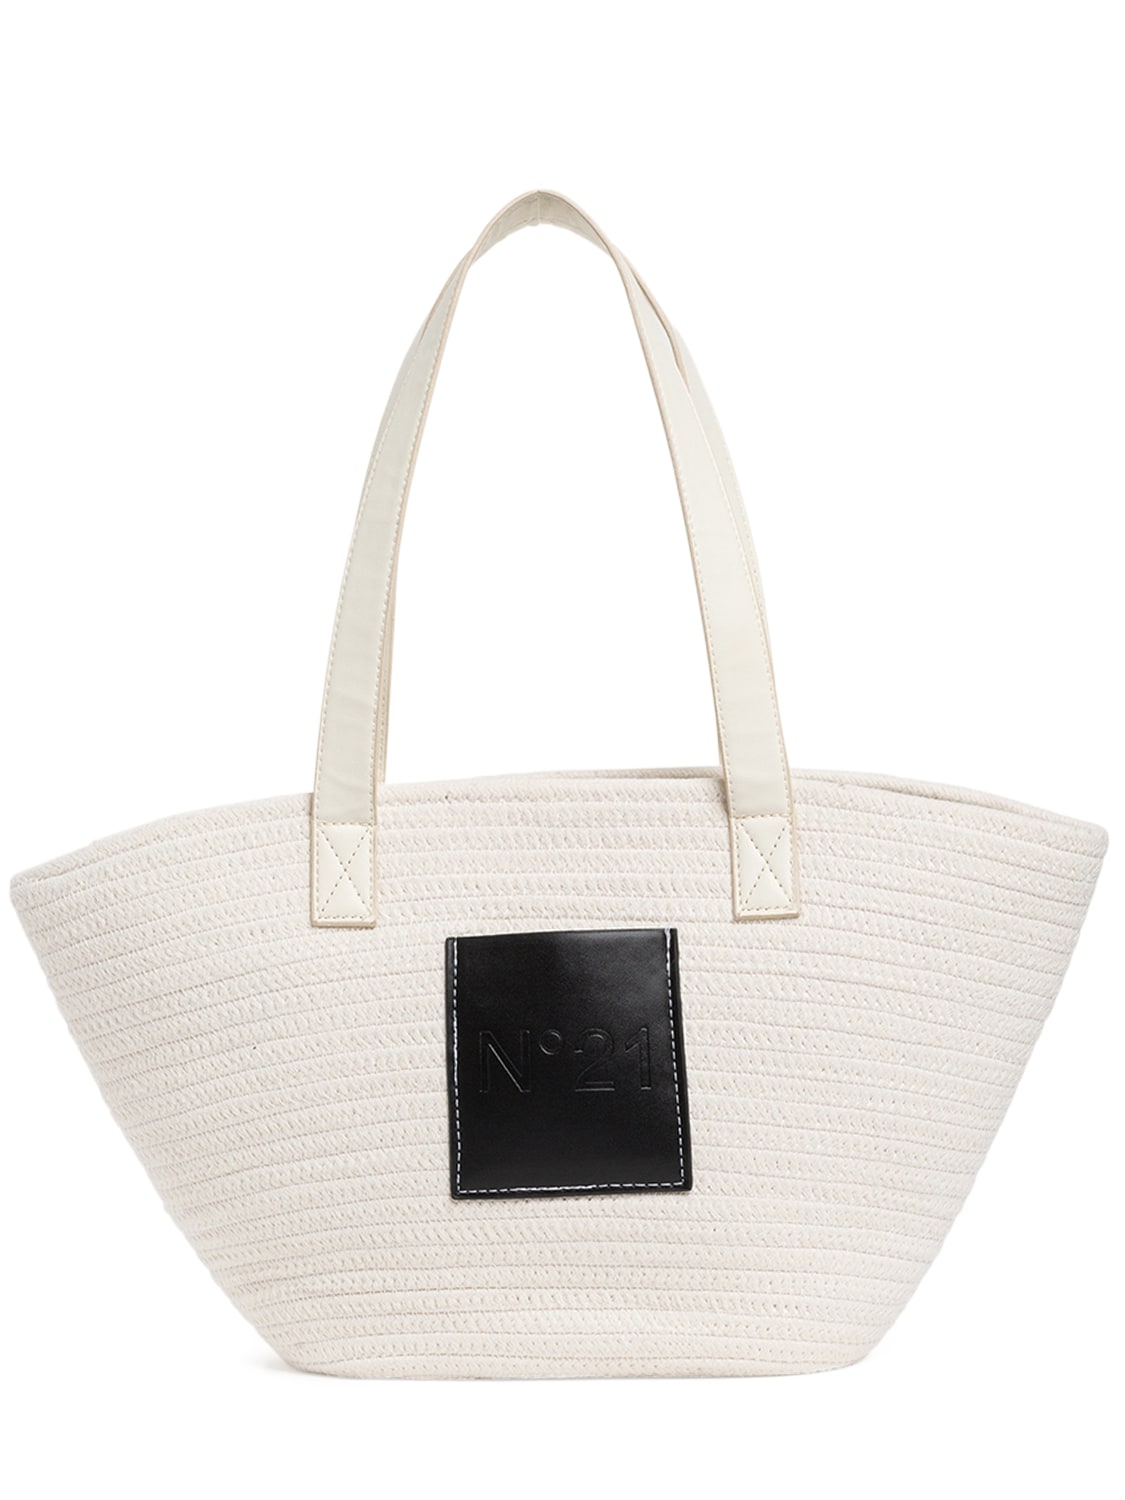 Image of Cotton Tote Bag